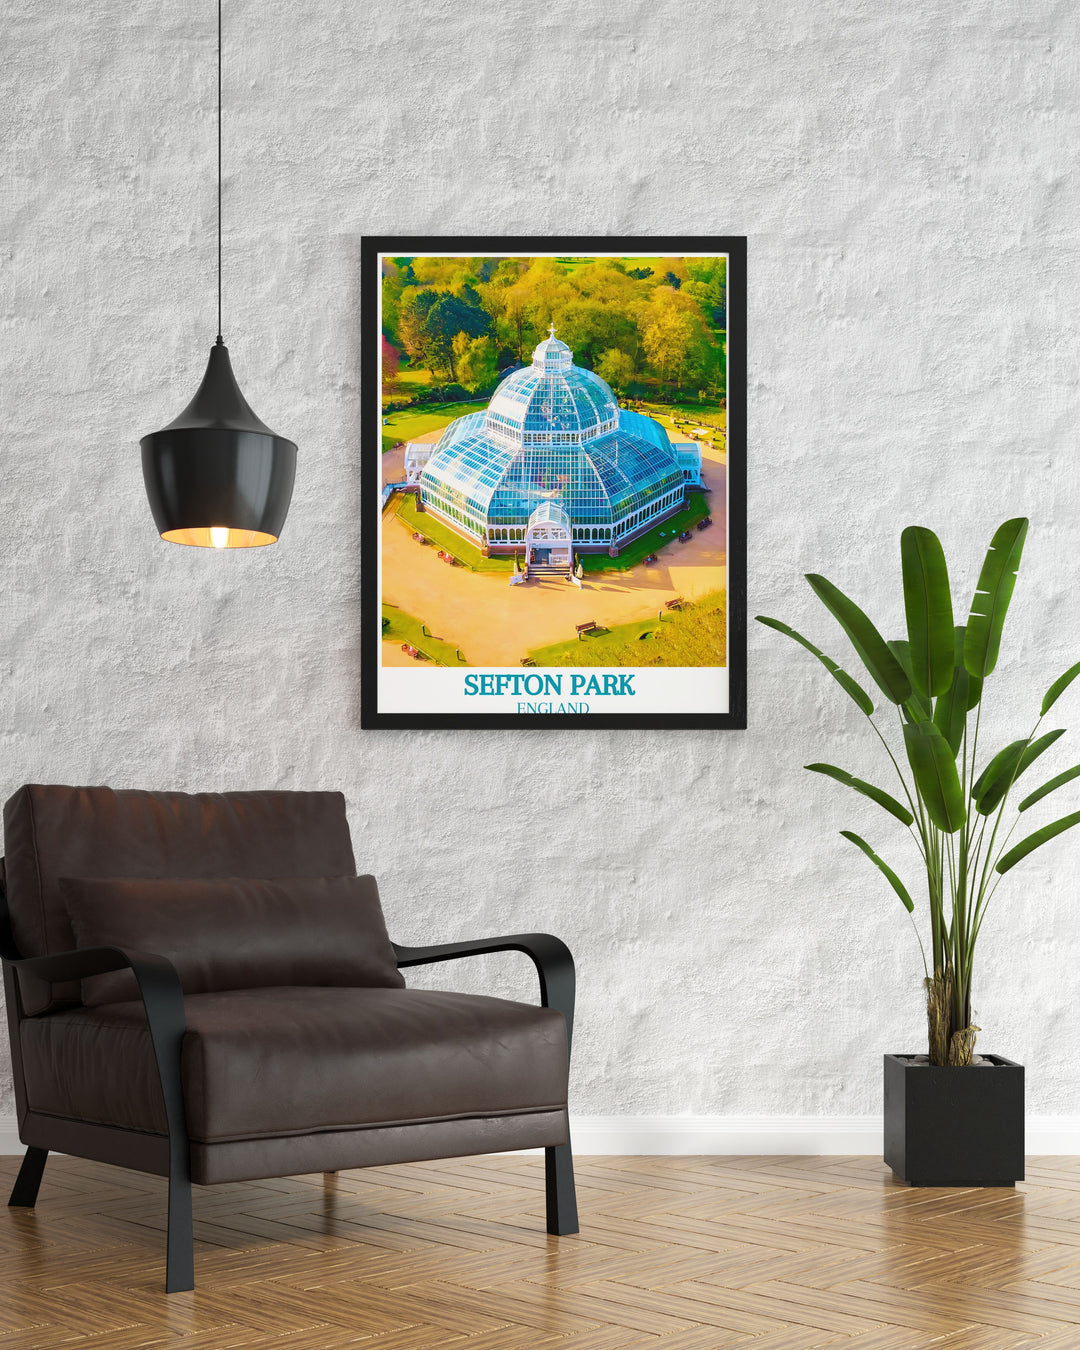 Vintage travel print showcasing the beauty of Liverpools Sefton Park and the majestic Palm House. This artwork brings the serene charm of Liverpools green spaces into your home making it an ideal gift for nature lovers and travelers.